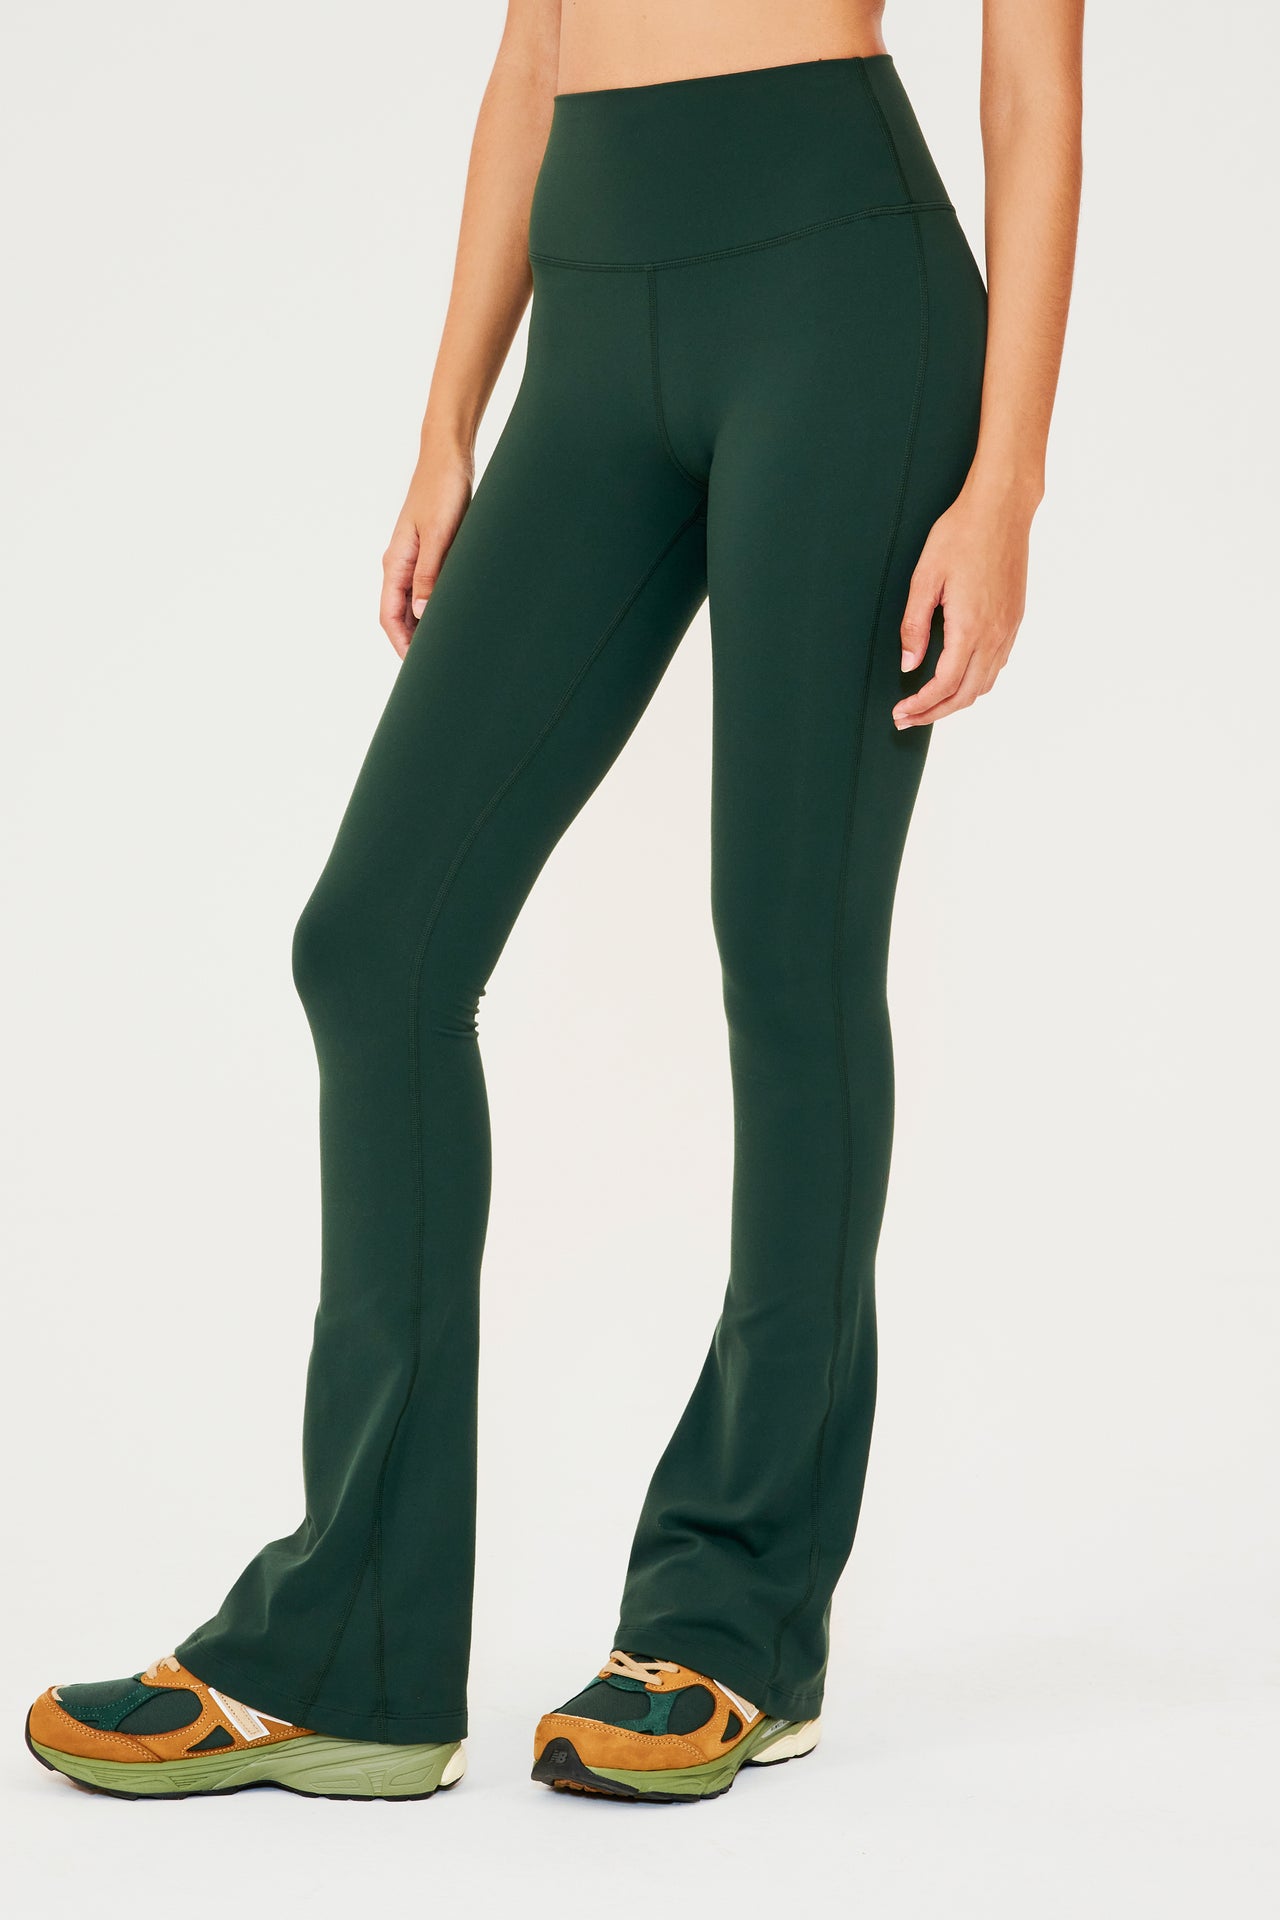 Front view of woman wearing dark green high waist below ankle length legging with wide flared bottoms. Paired with dark green, dark orange and light green color block shoes